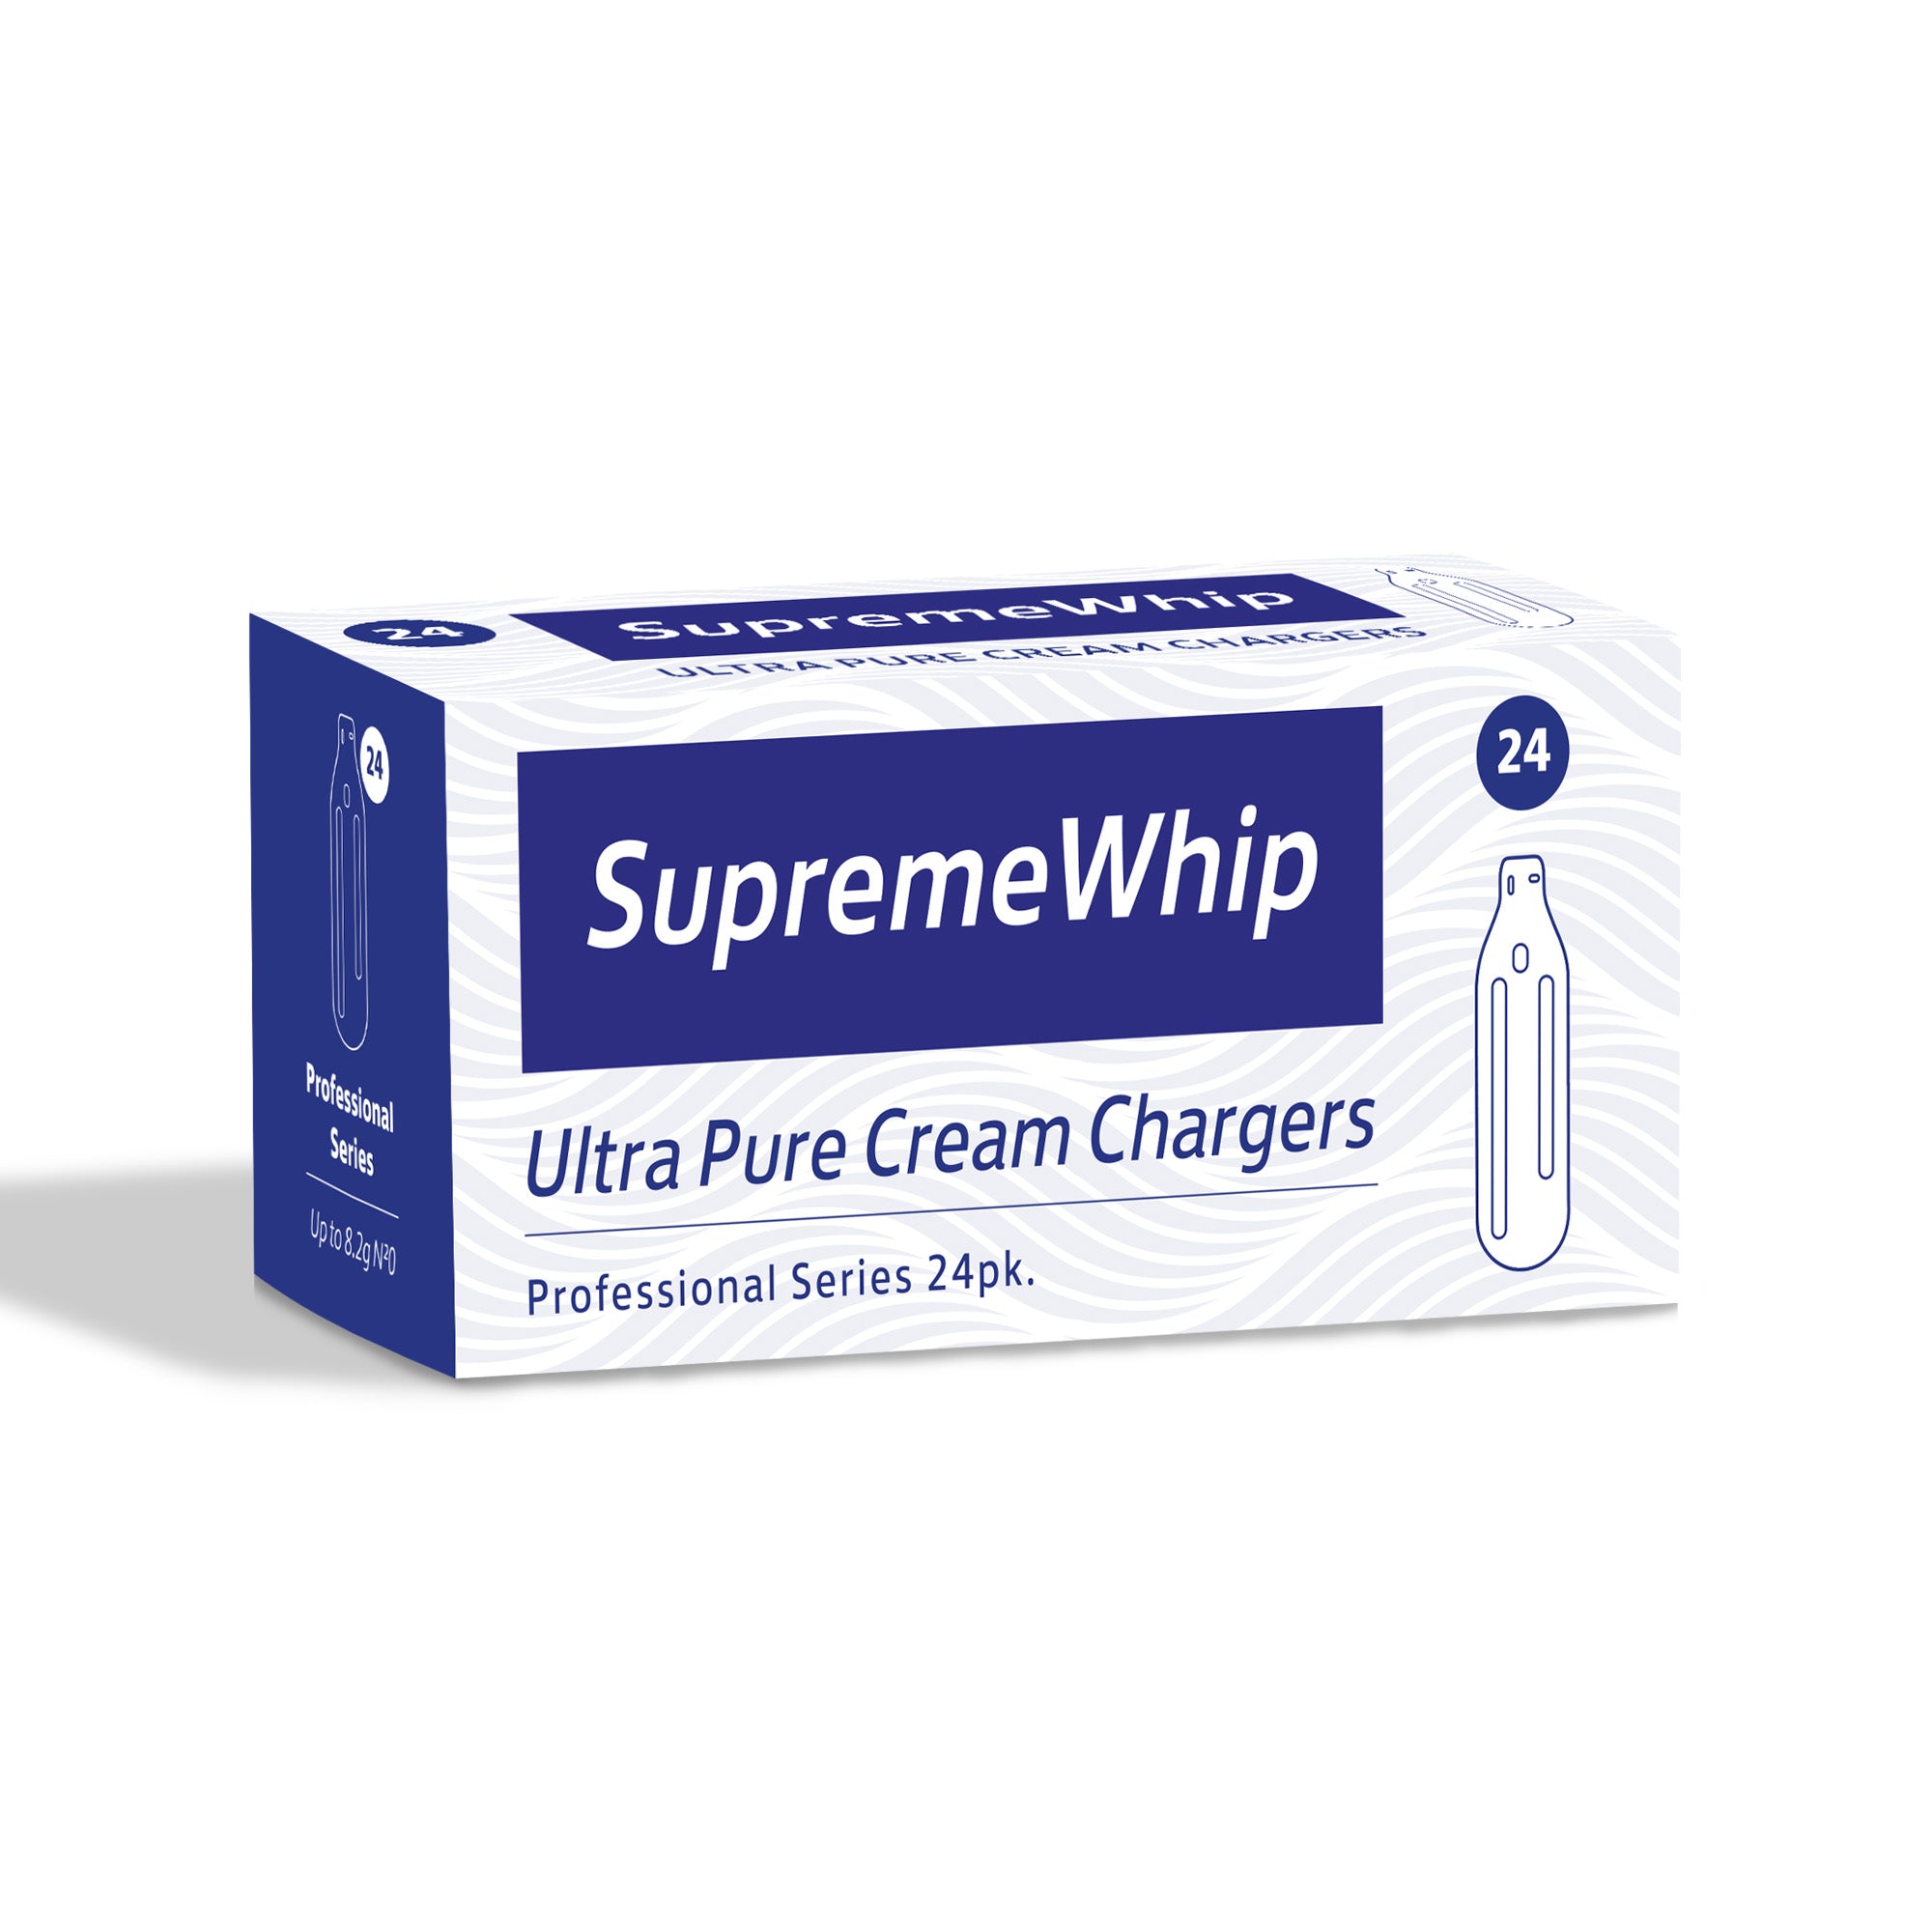 600 SupremeWhip Cream Chargers - 25 x 24 Pack (1 Carton)